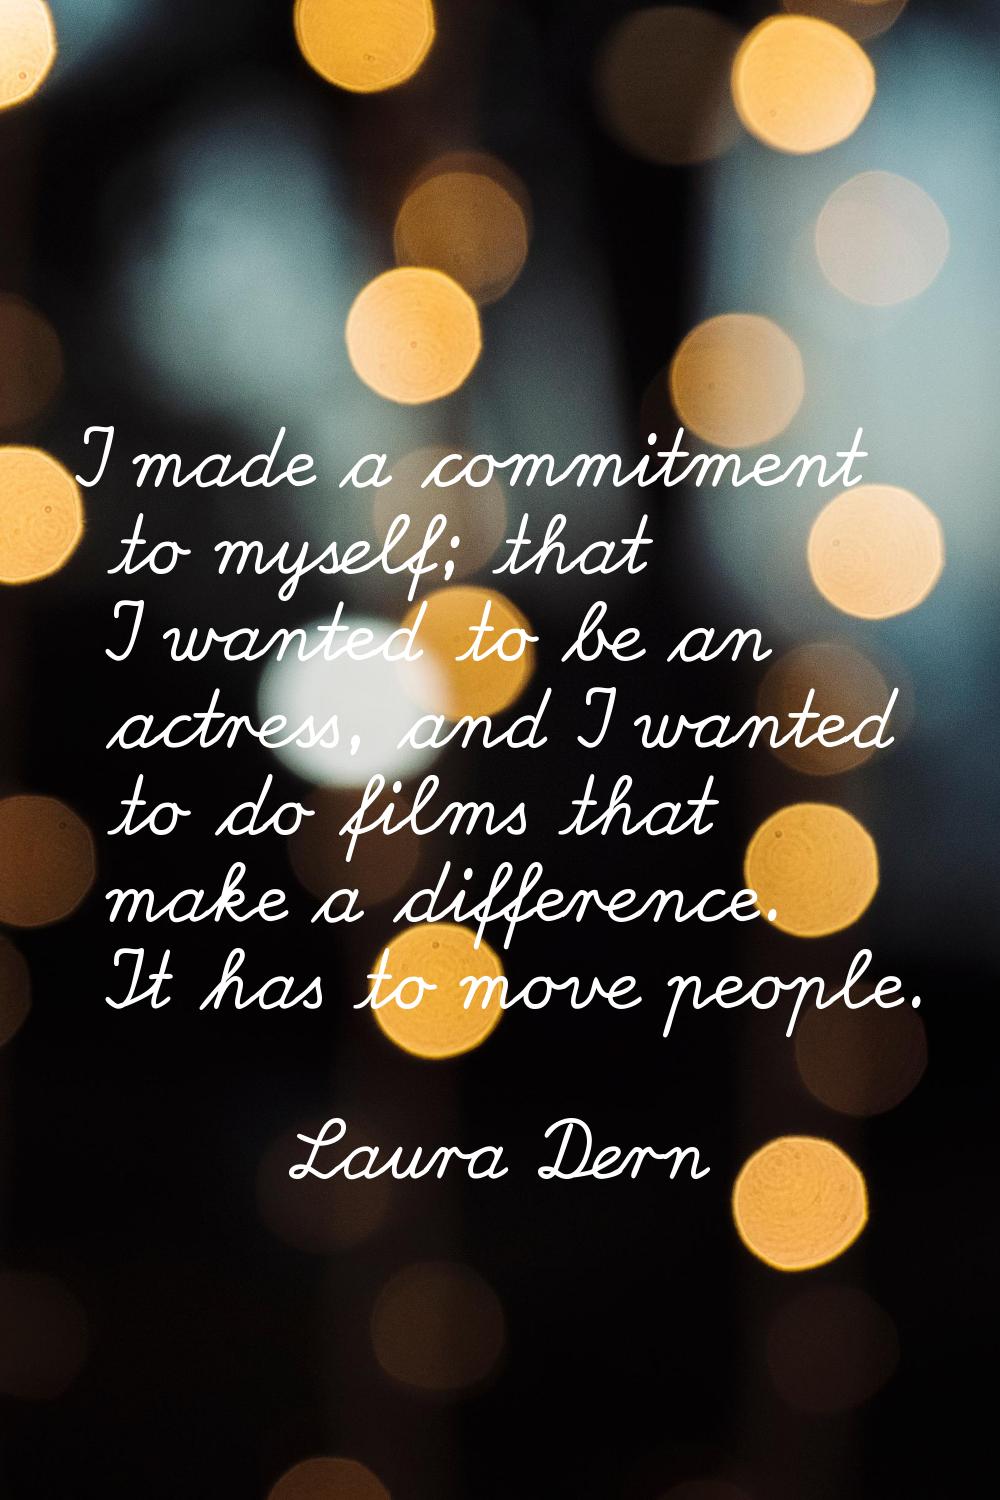 I made a commitment to myself; that I wanted to be an actress, and I wanted to do films that make a